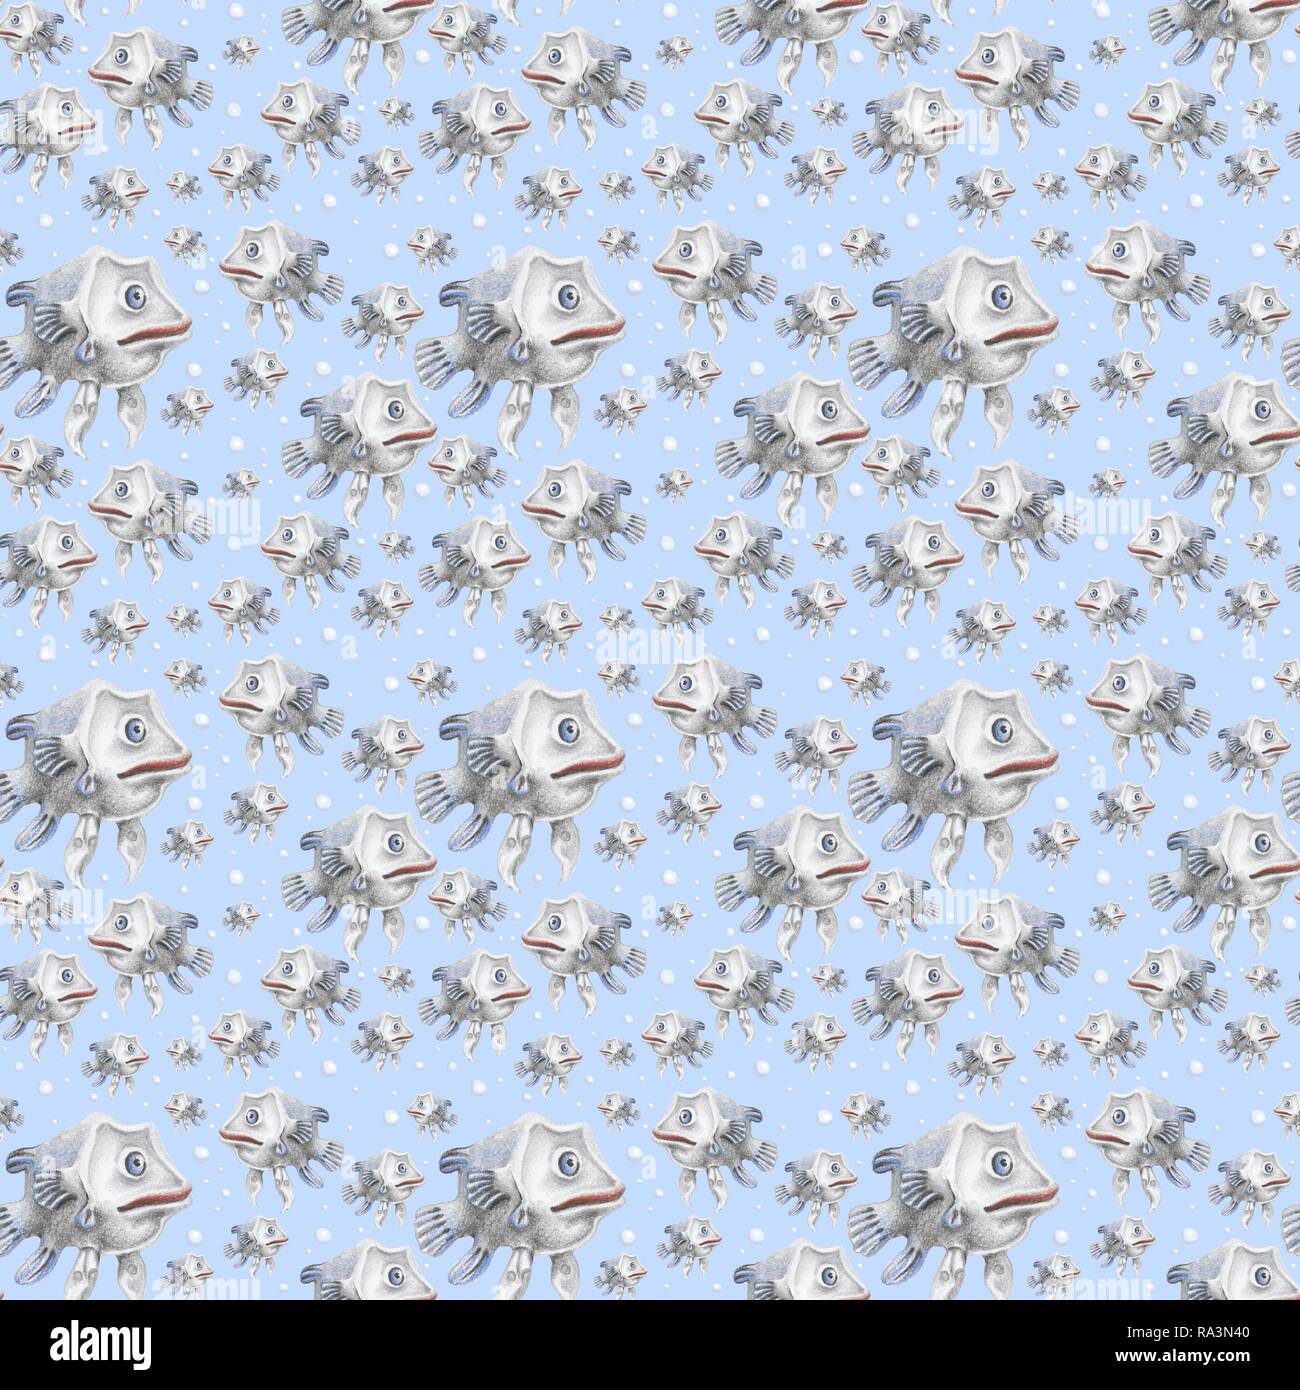 Wrapping paper, wallpaper, background blue, seamless pattern, fish in water with bubbles, Germany Stock Photo